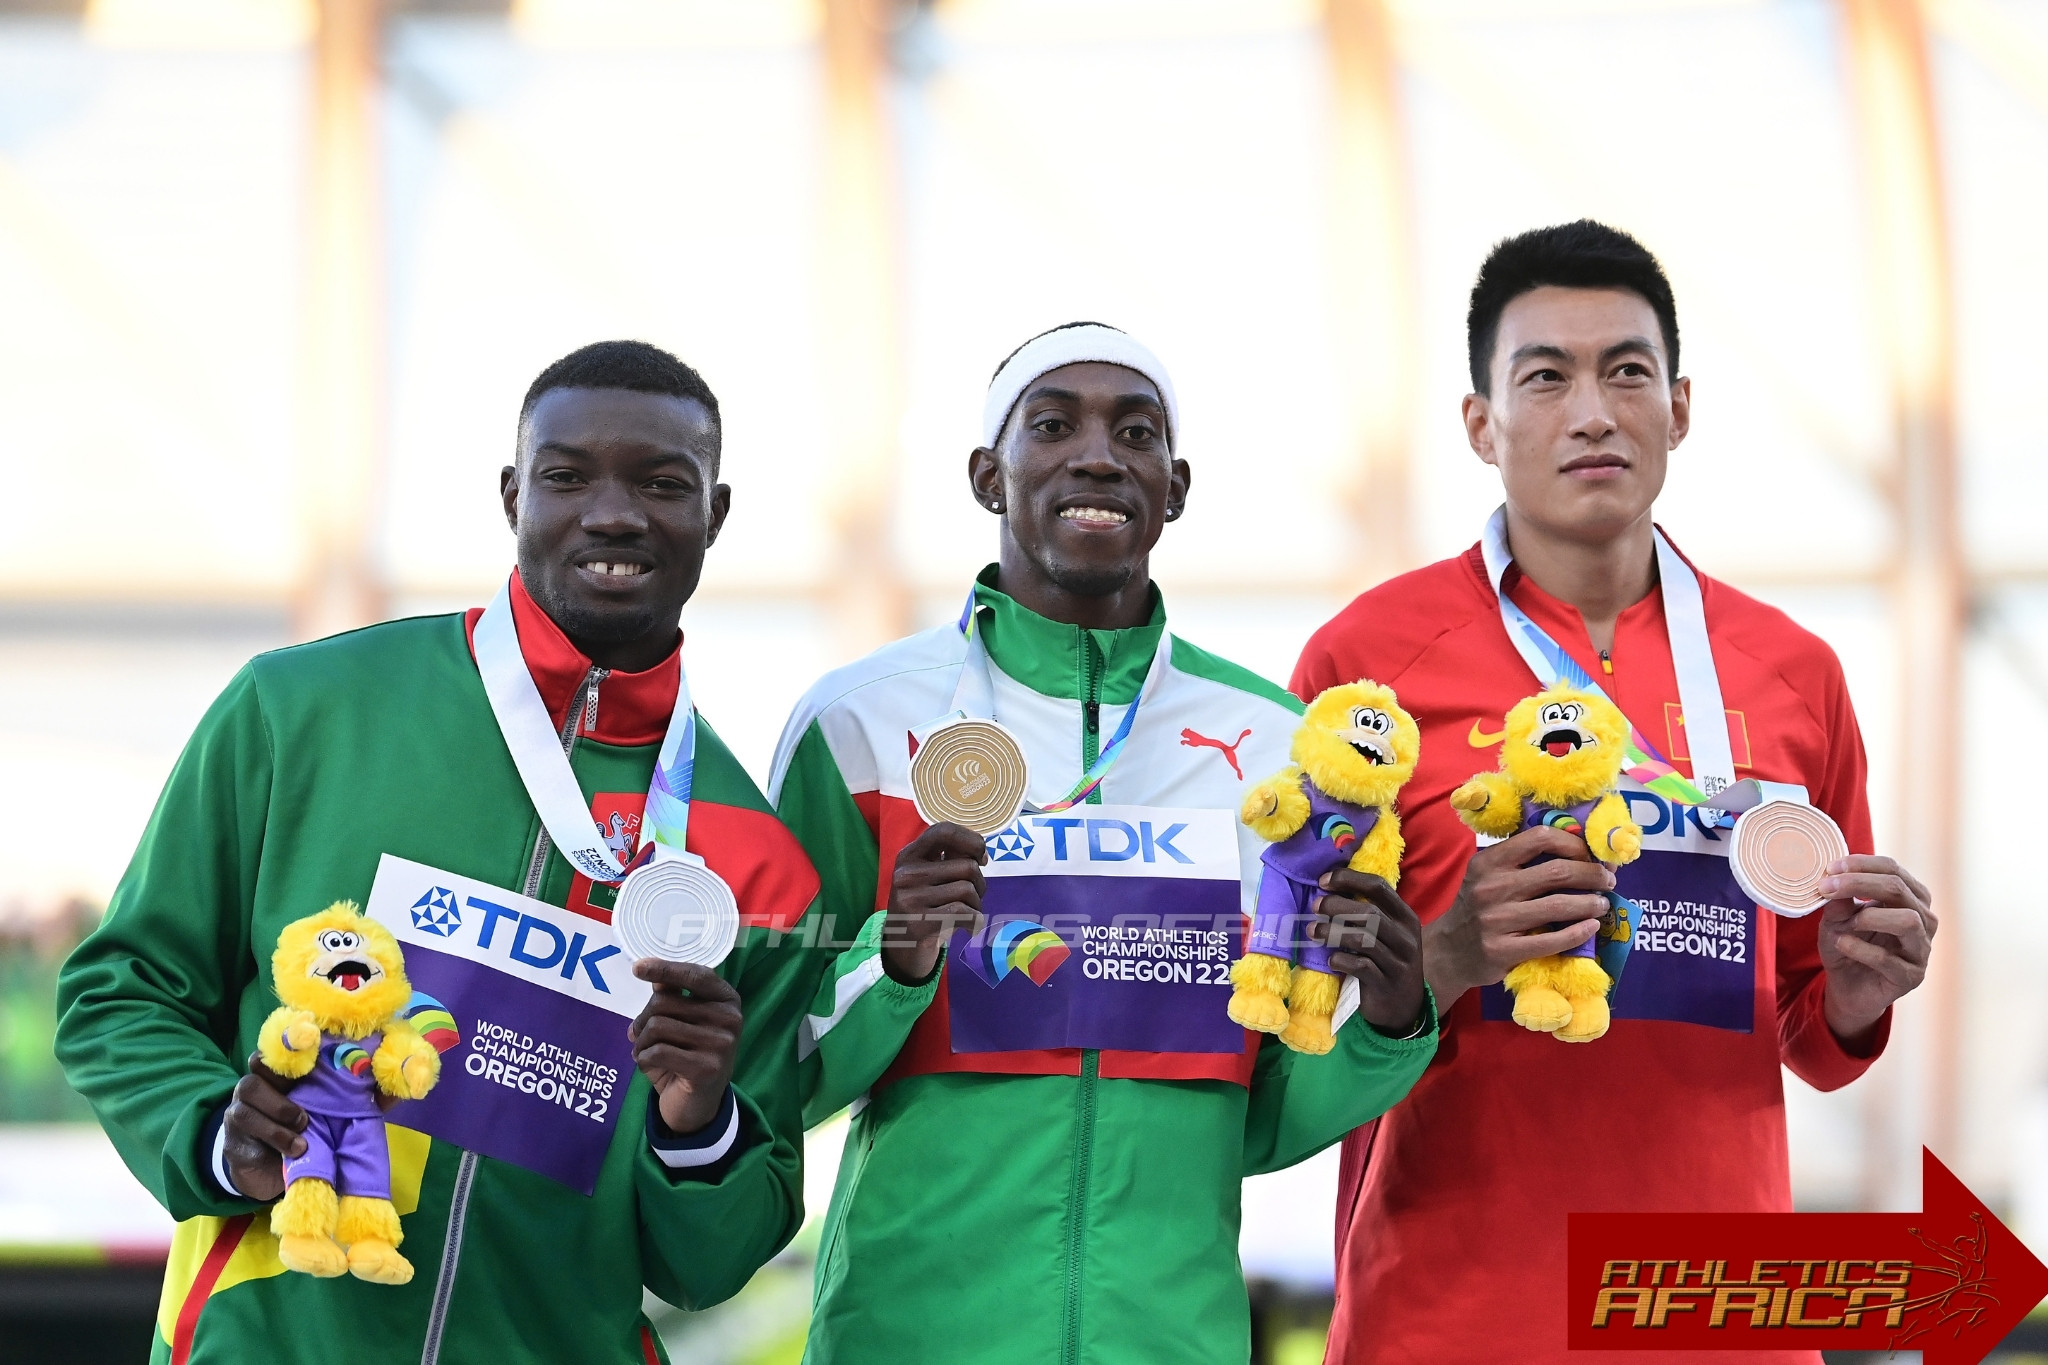 Silver medalist Hugues Fabrice Zango of Team Burkina Faso, gold medalist Pedro Pichardo of Team Portugal and bronze medalist Yaming Zhu of Team China pose during the medal ceremony for the Men's Triple Jump Final on day nine of the World Athletics Championships Oregon22 at Hayward Field on July 23, 2022 in Eugene, Oregon. (Photo by Hannah Peters/Getty Images for World Athletics)